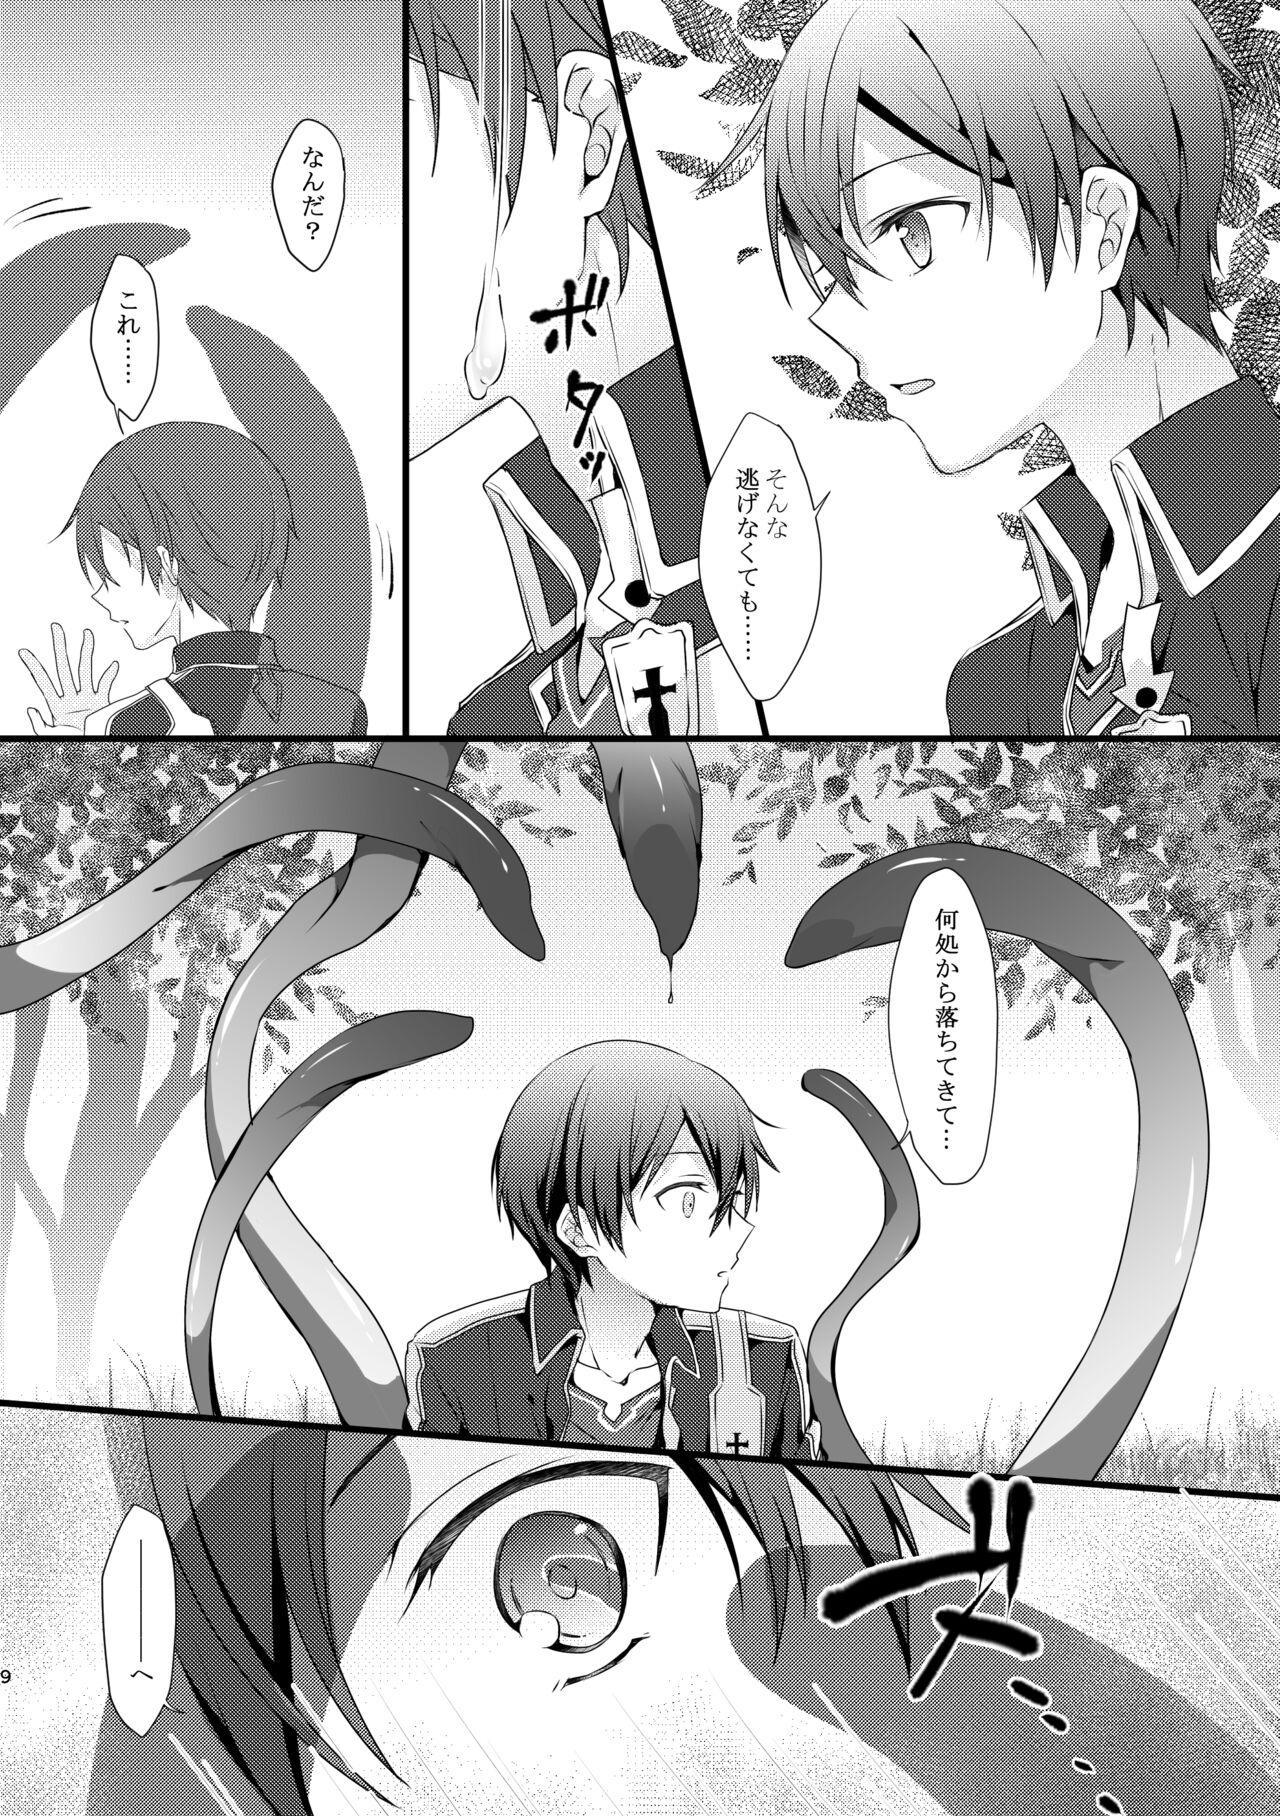 Para 触手ちゃんはユジキリが羨ましい！ - Sword art online Brother Sister - Page 8